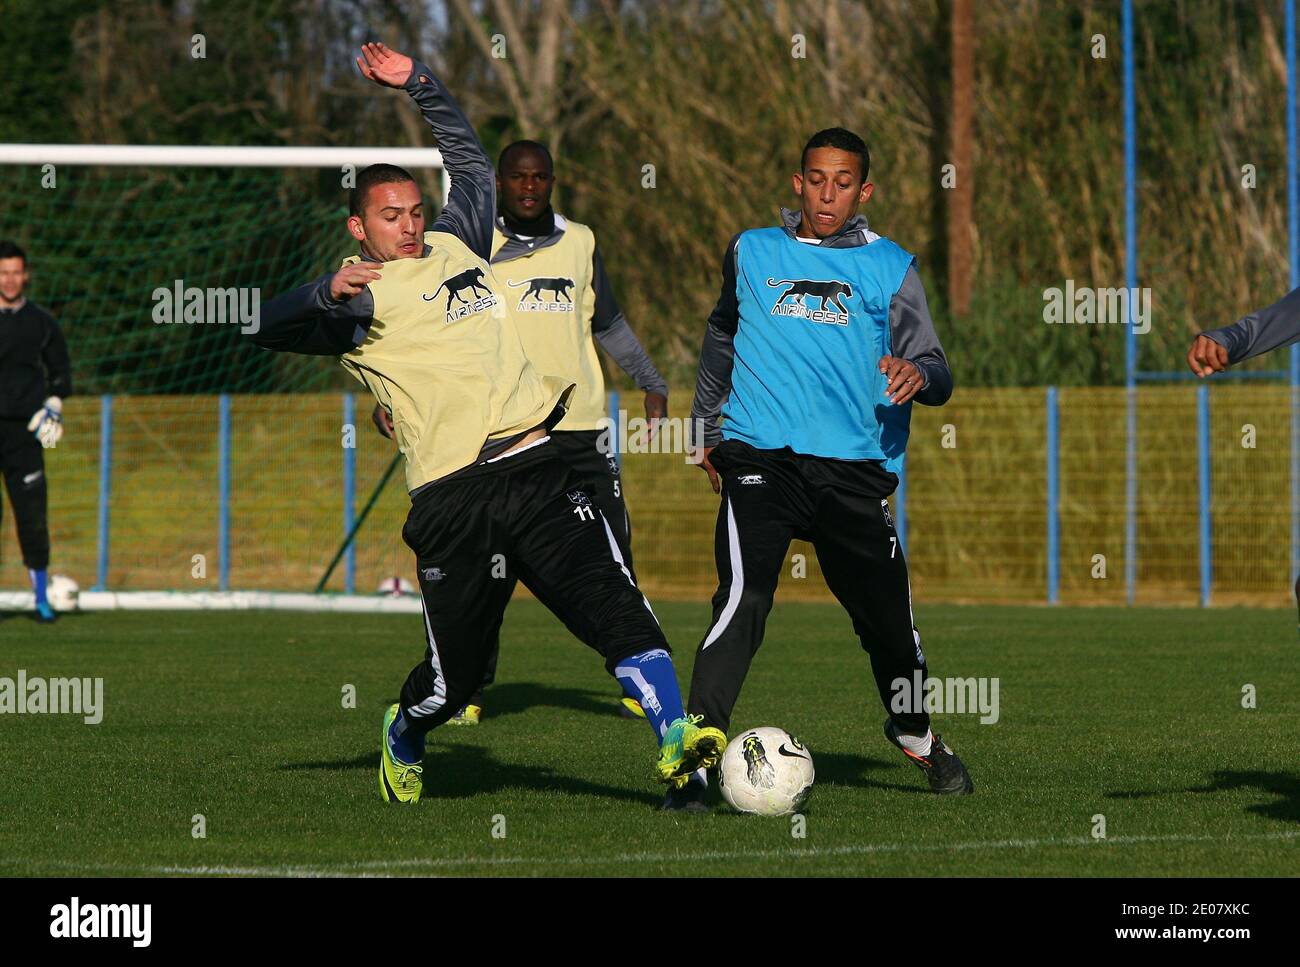 Auxerre's Kamel Chafni and Ben Sahar during the training camp in Canet en Roussillon at the Saint-Michel Stadium in Canet en Roussillon, near Perpignan, France on January 6, 2012 prior to French Cup soccer game Chambly. Photo by Michel Clementz/ABACAPRESS.COM Stock Photo